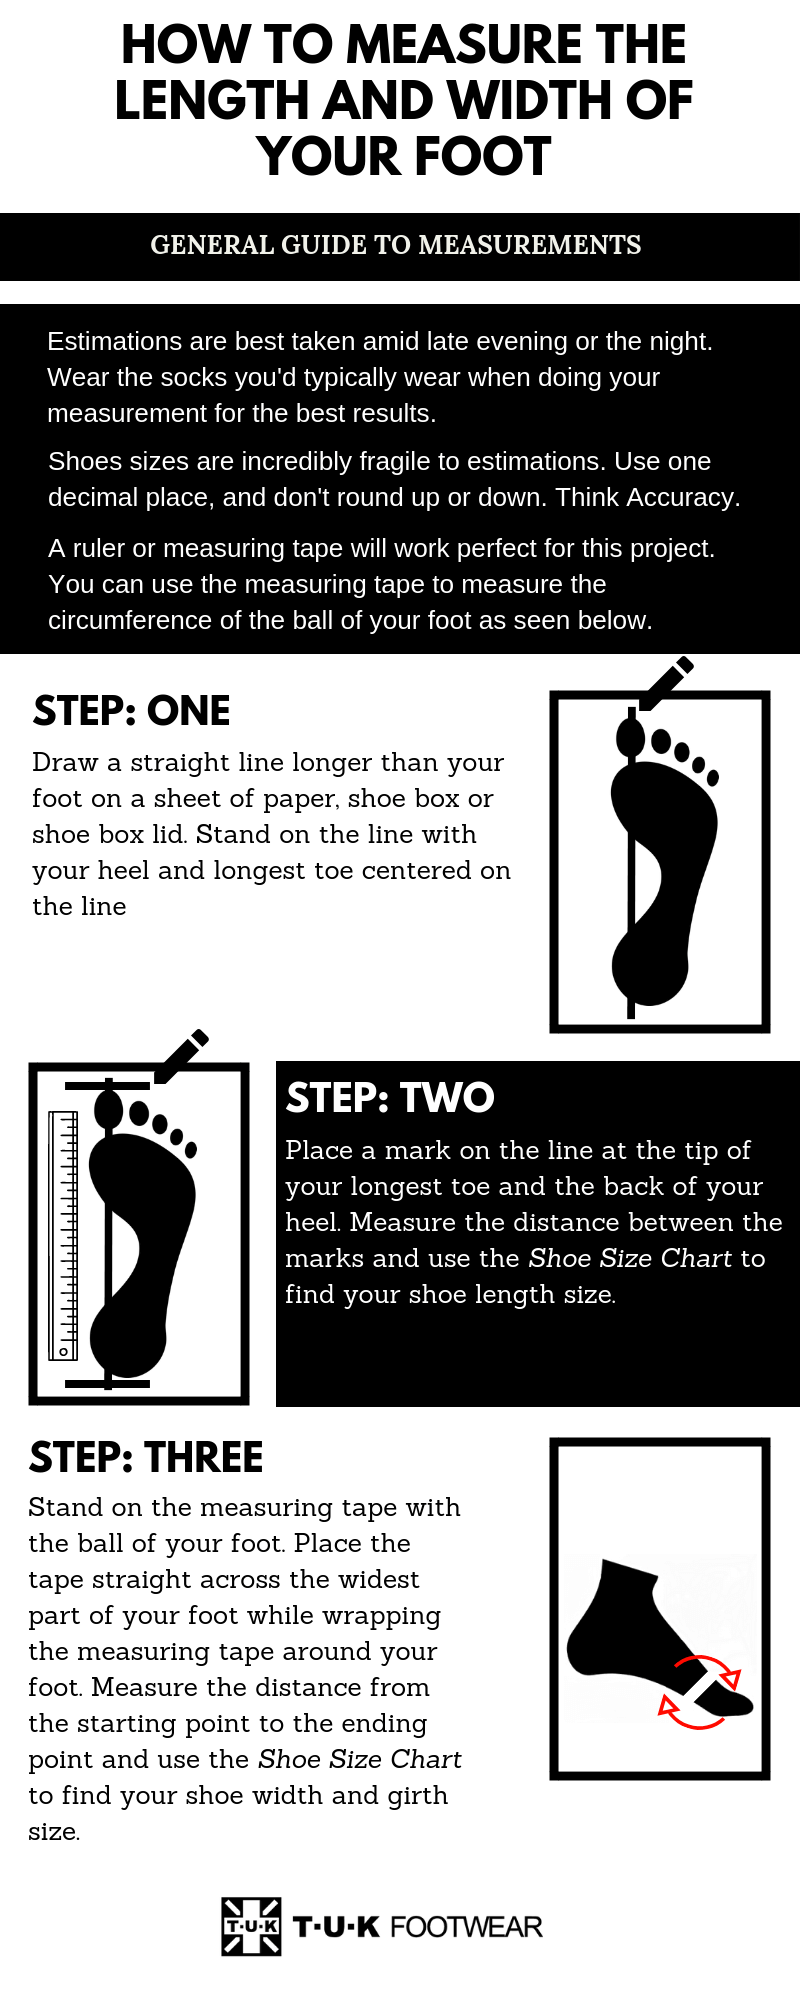 How to measure your foot instructions